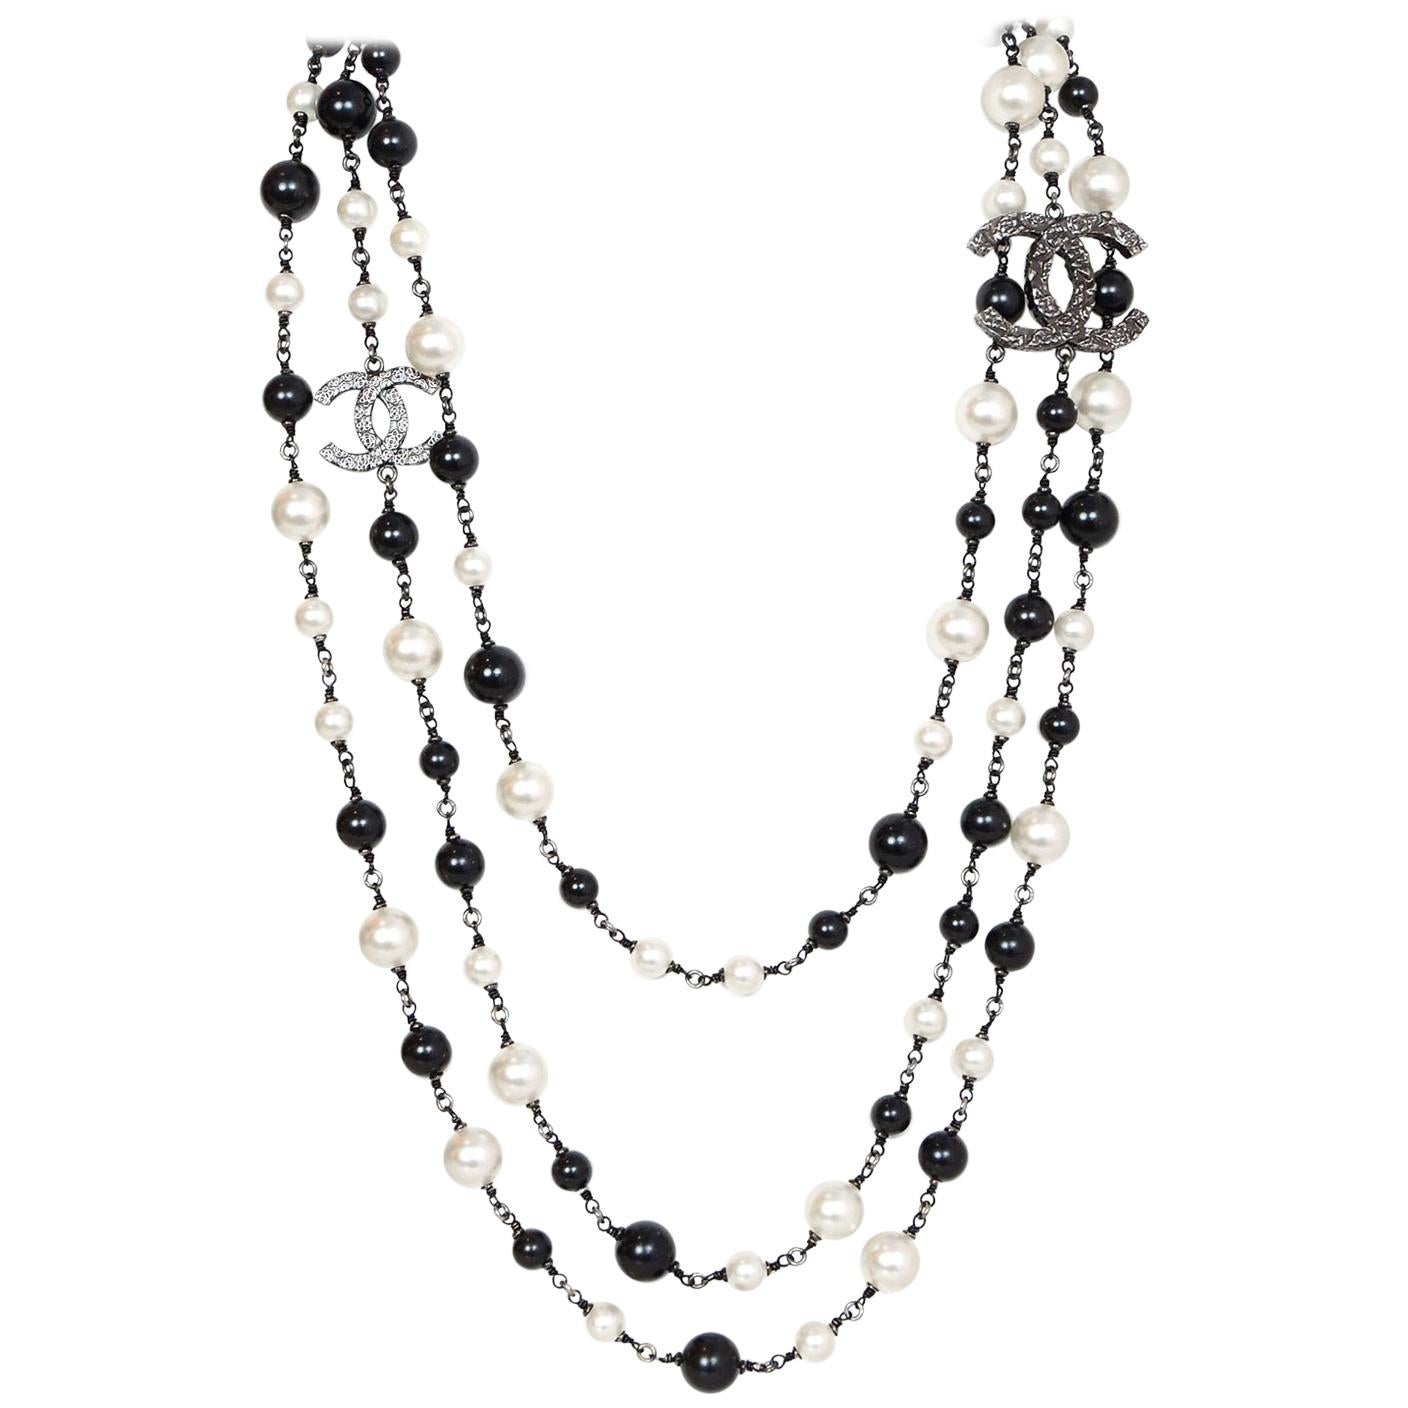 Chanel 2011 Black Bead & Ivory Faux Pearl CC Three-Strand Necklace